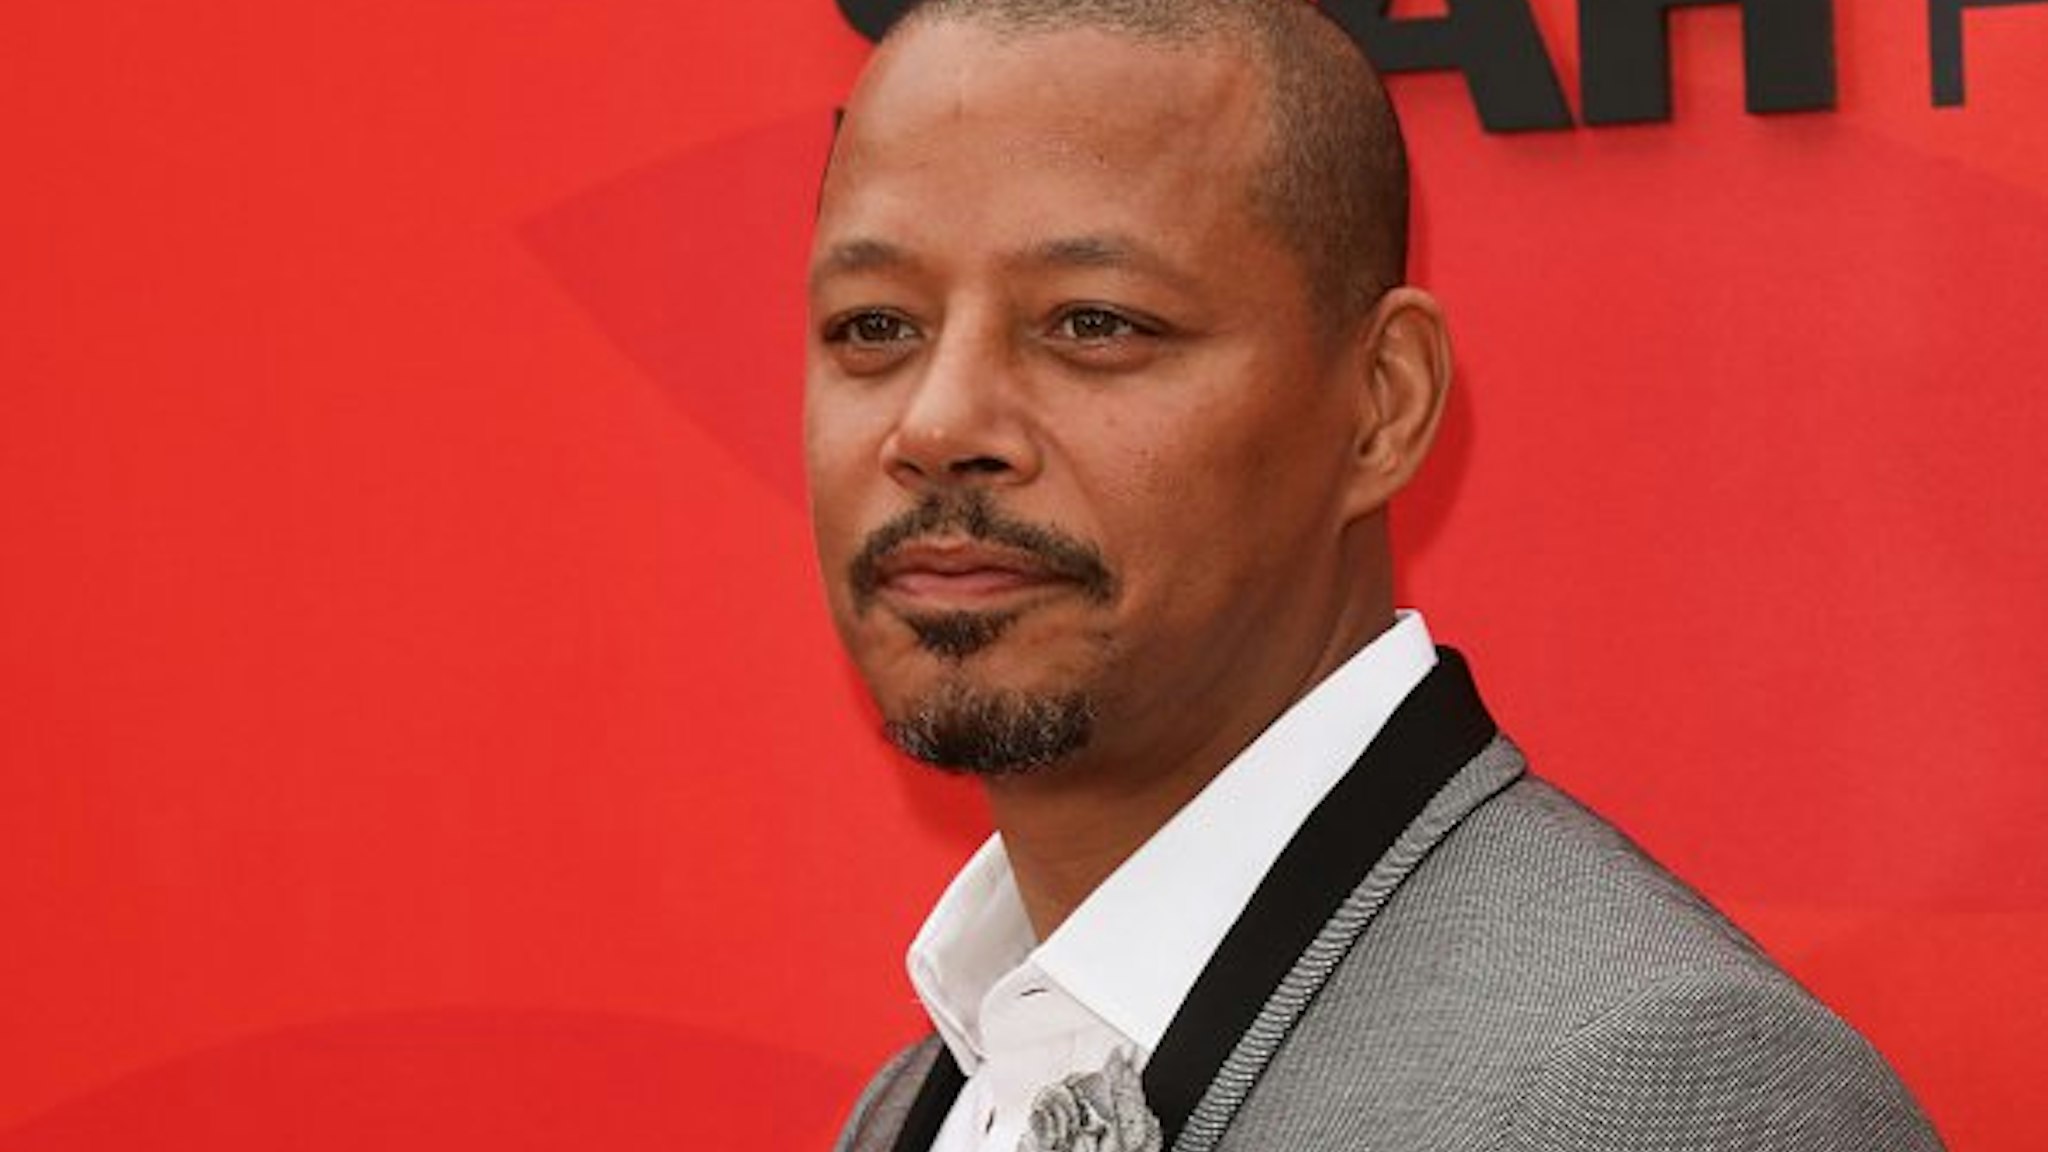 Actor Terrence Howard attends the Smithsonian's celebration of Asian Pacific Americans at City Market Social House on May 18, 2019 in Los Angeles, California.